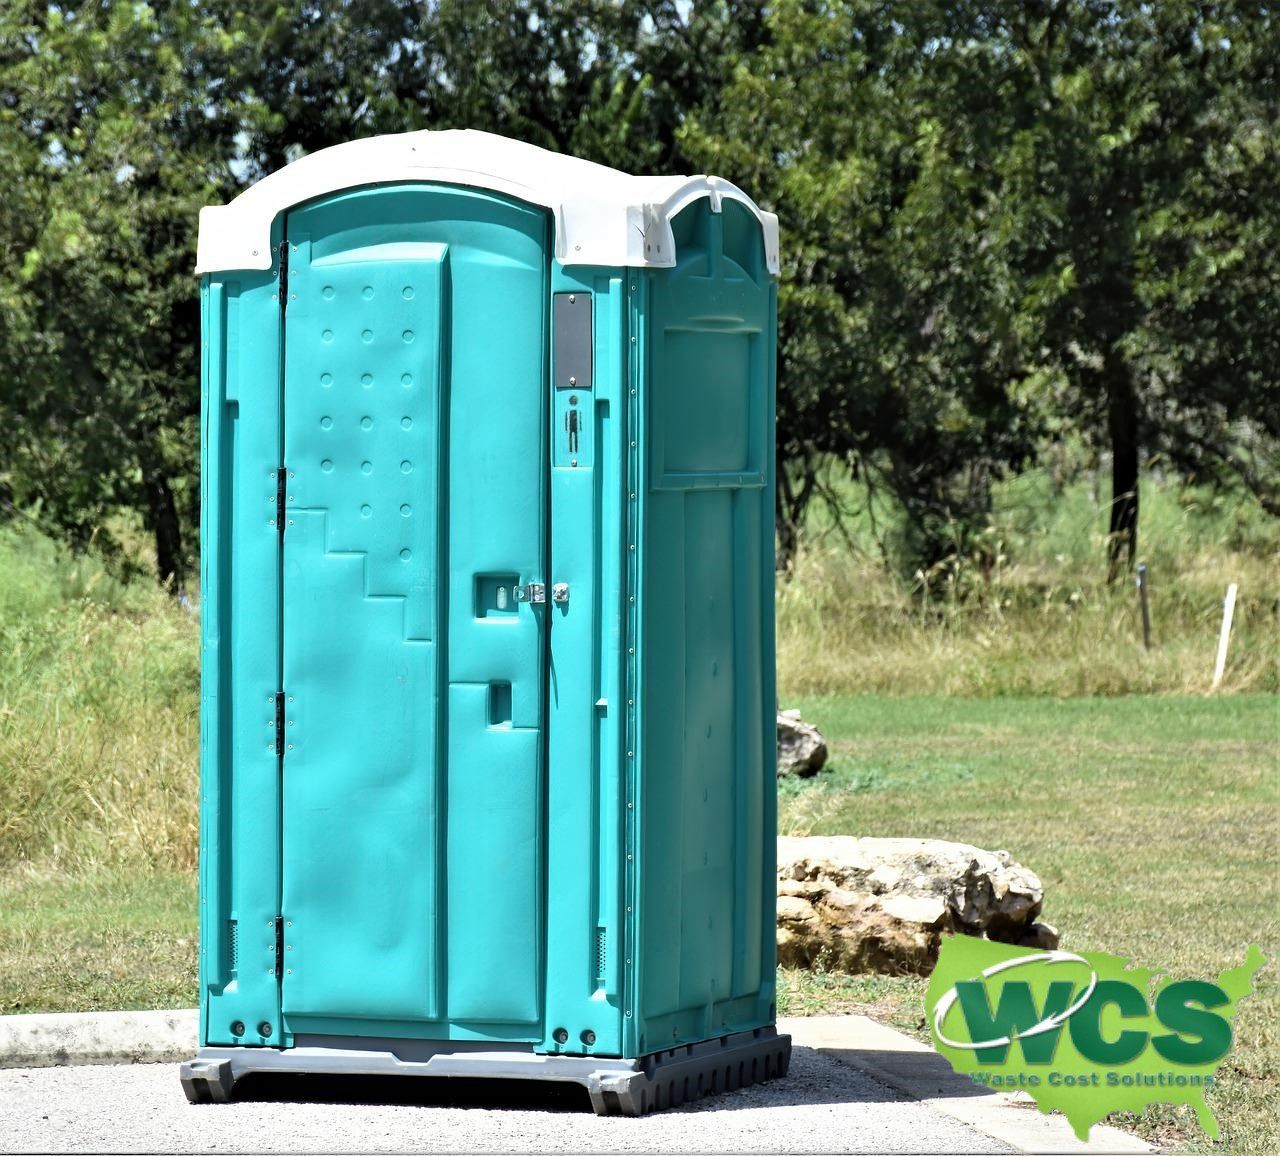 Porta Potty For Event Services